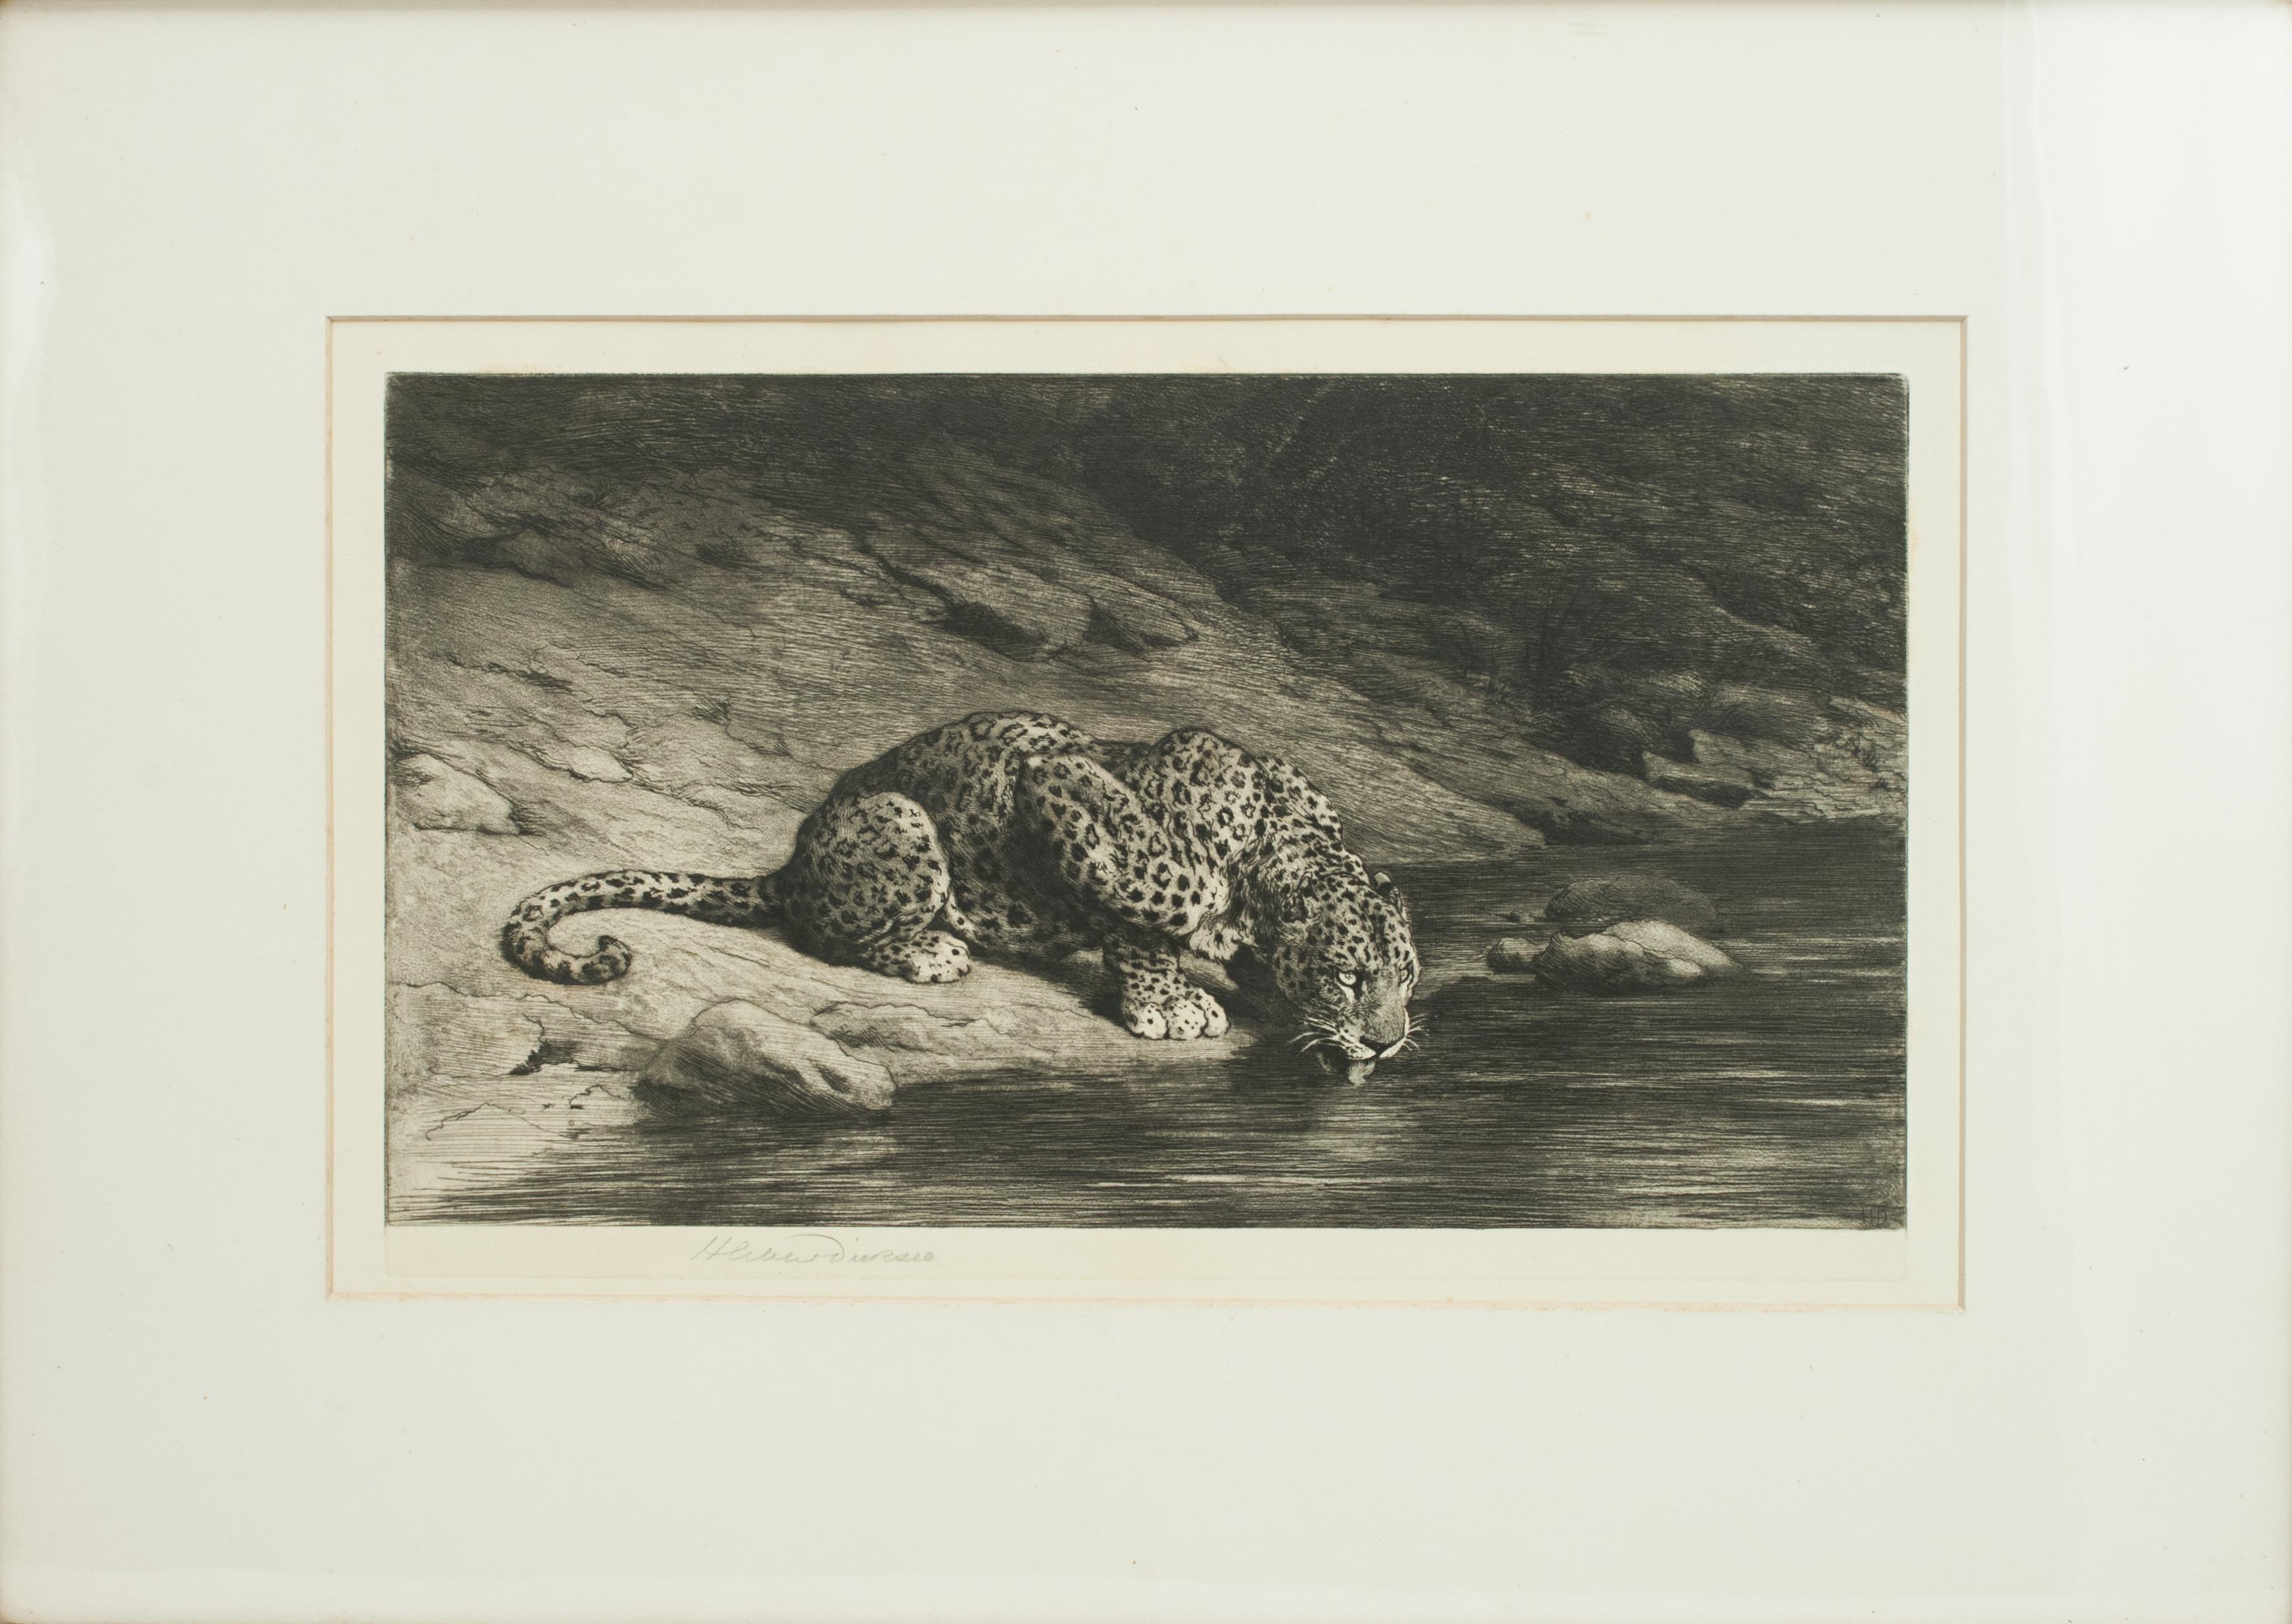 Sporting Art Leopard Drinking from the River by Herbert Dicksee, Drinking at the Waters Edge 